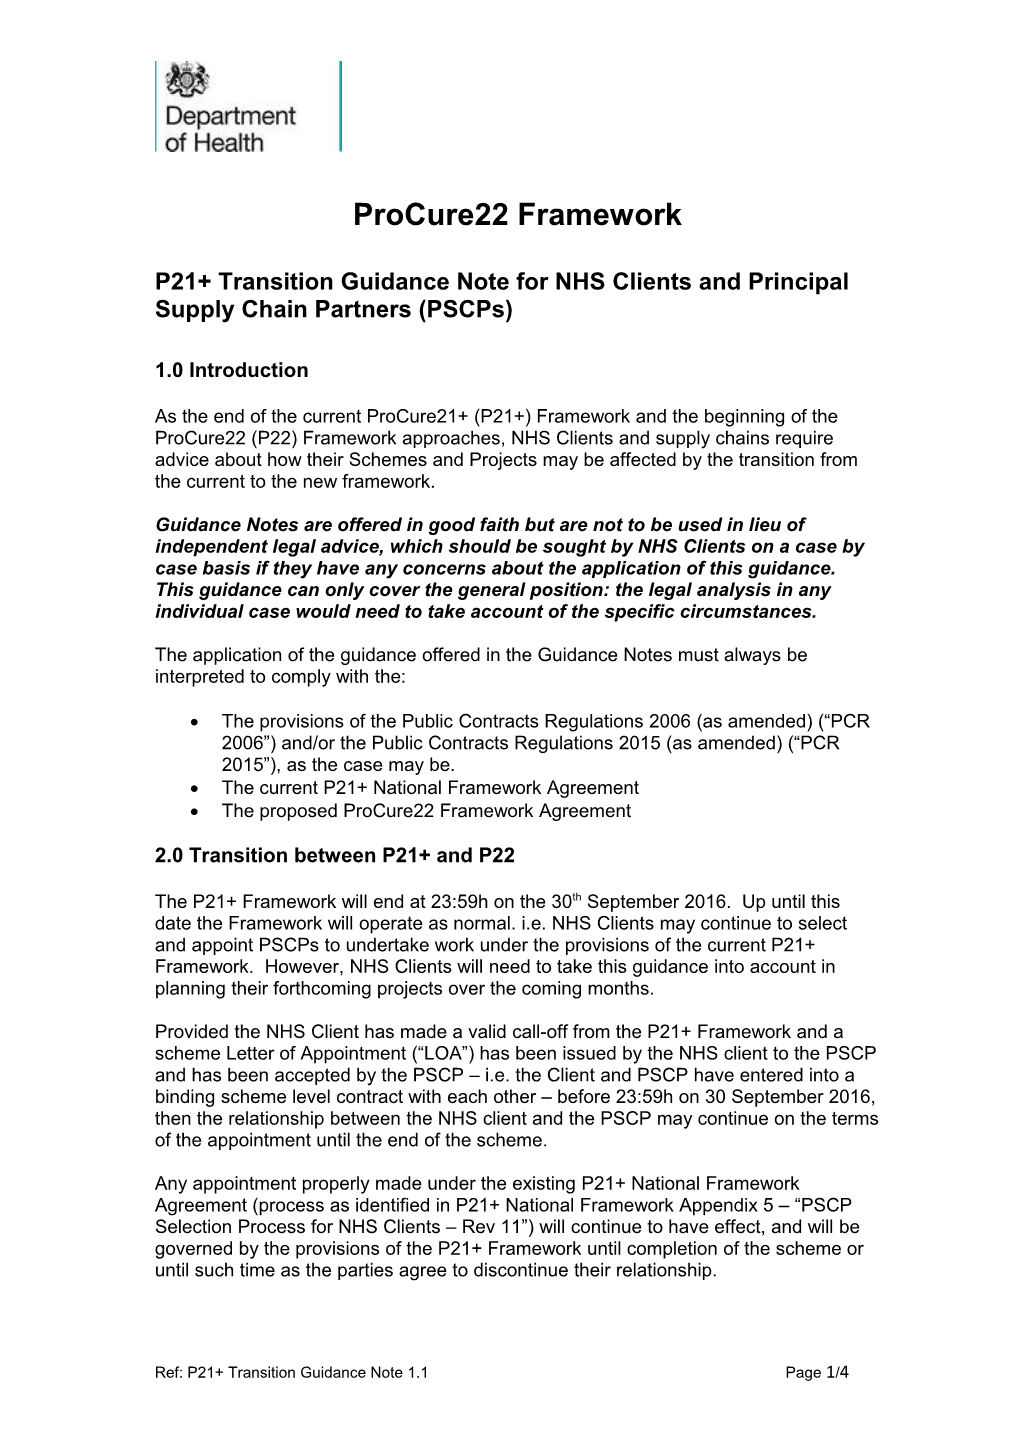 P21+ Transition Guidance Note for NHS Clients and Principal Supply Chain Partners (Pscps)